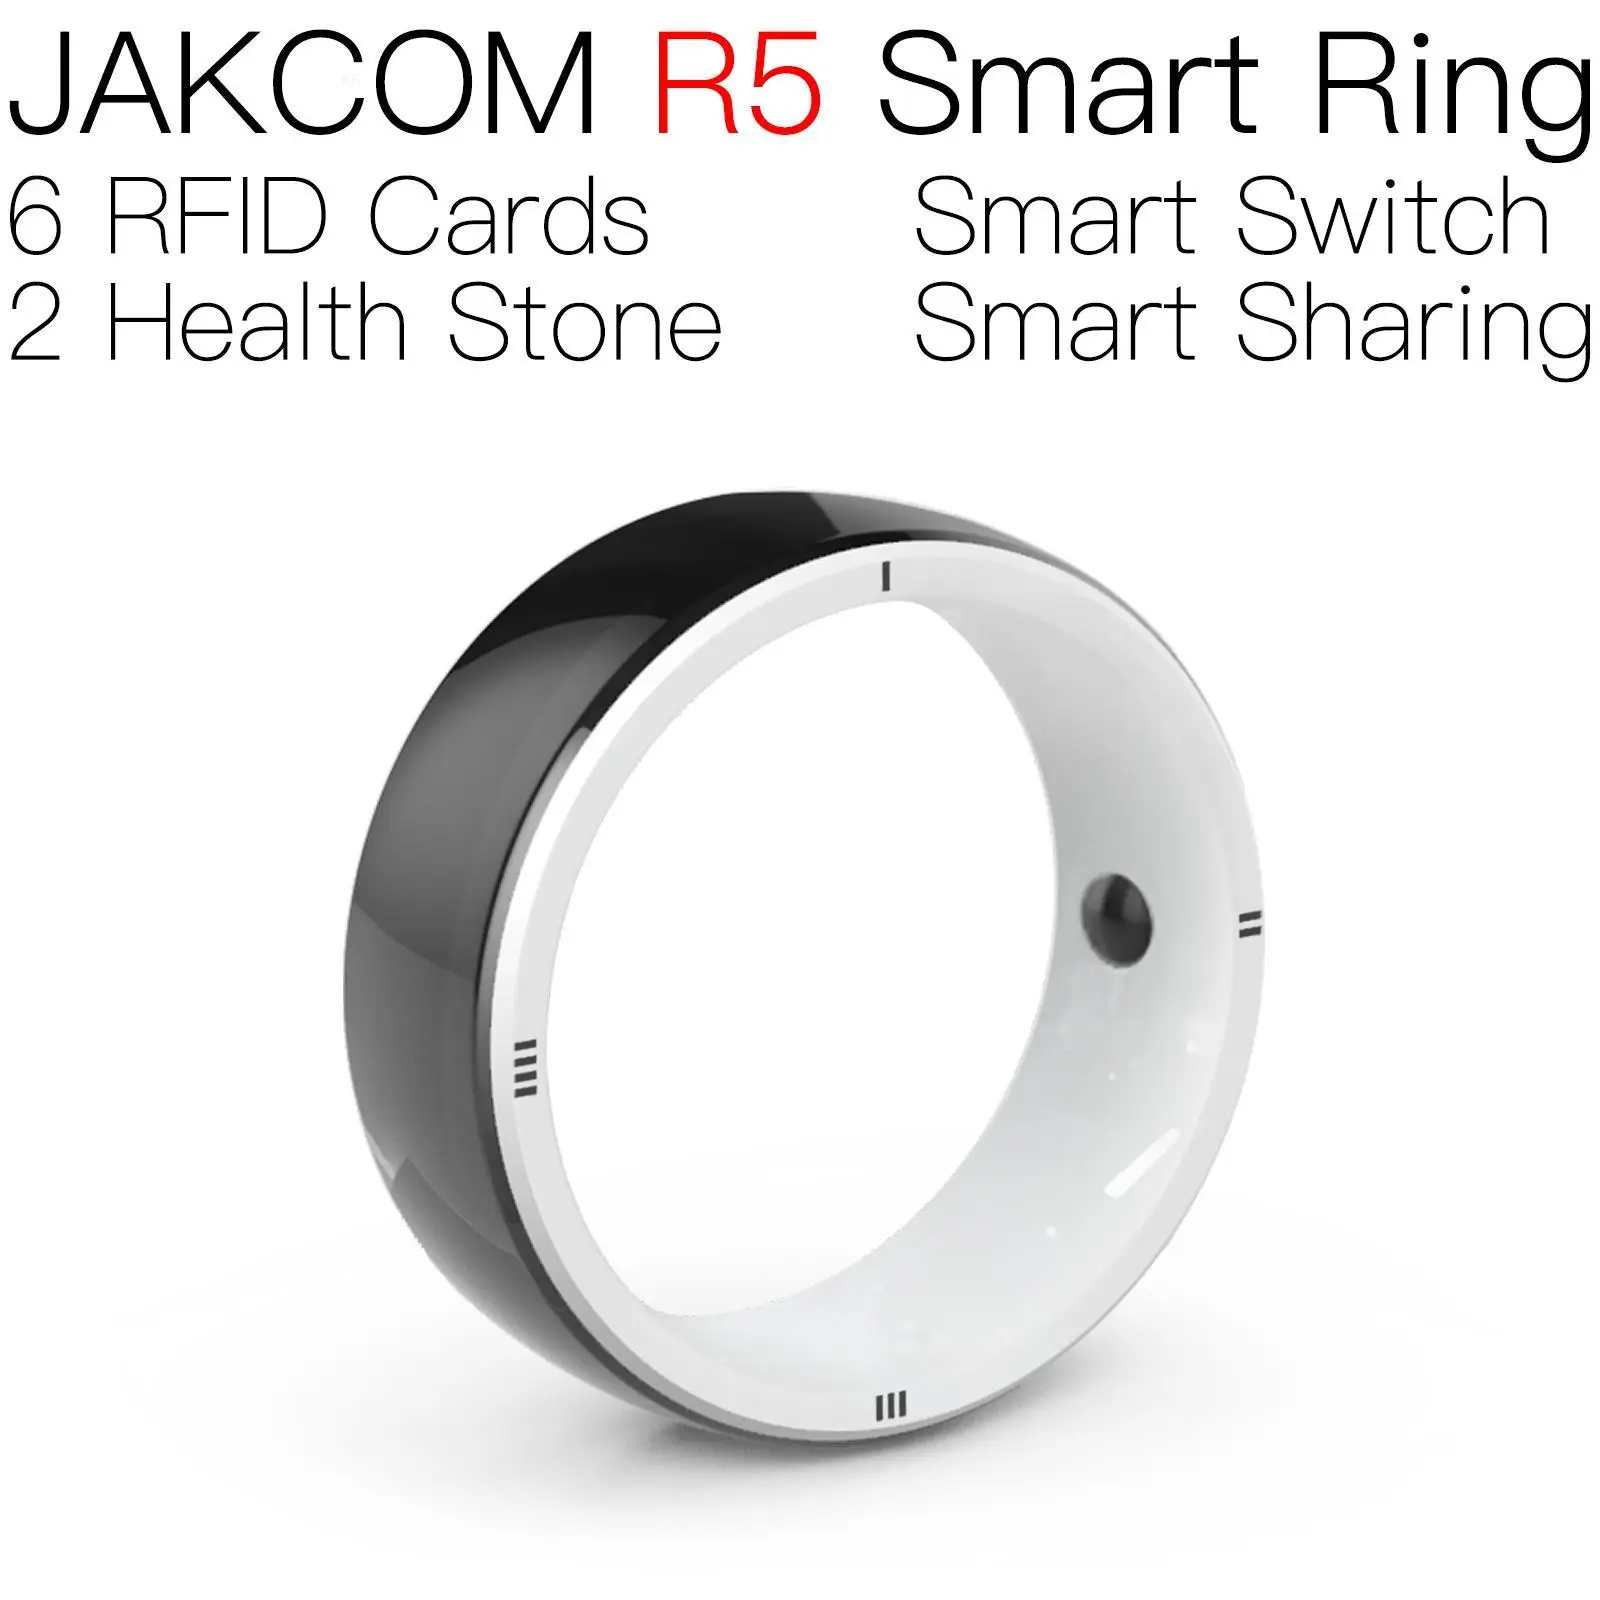 

JAKCOM R5 Smart Ring Super value than writable key tags 6 writable cards for office and other access control needed places